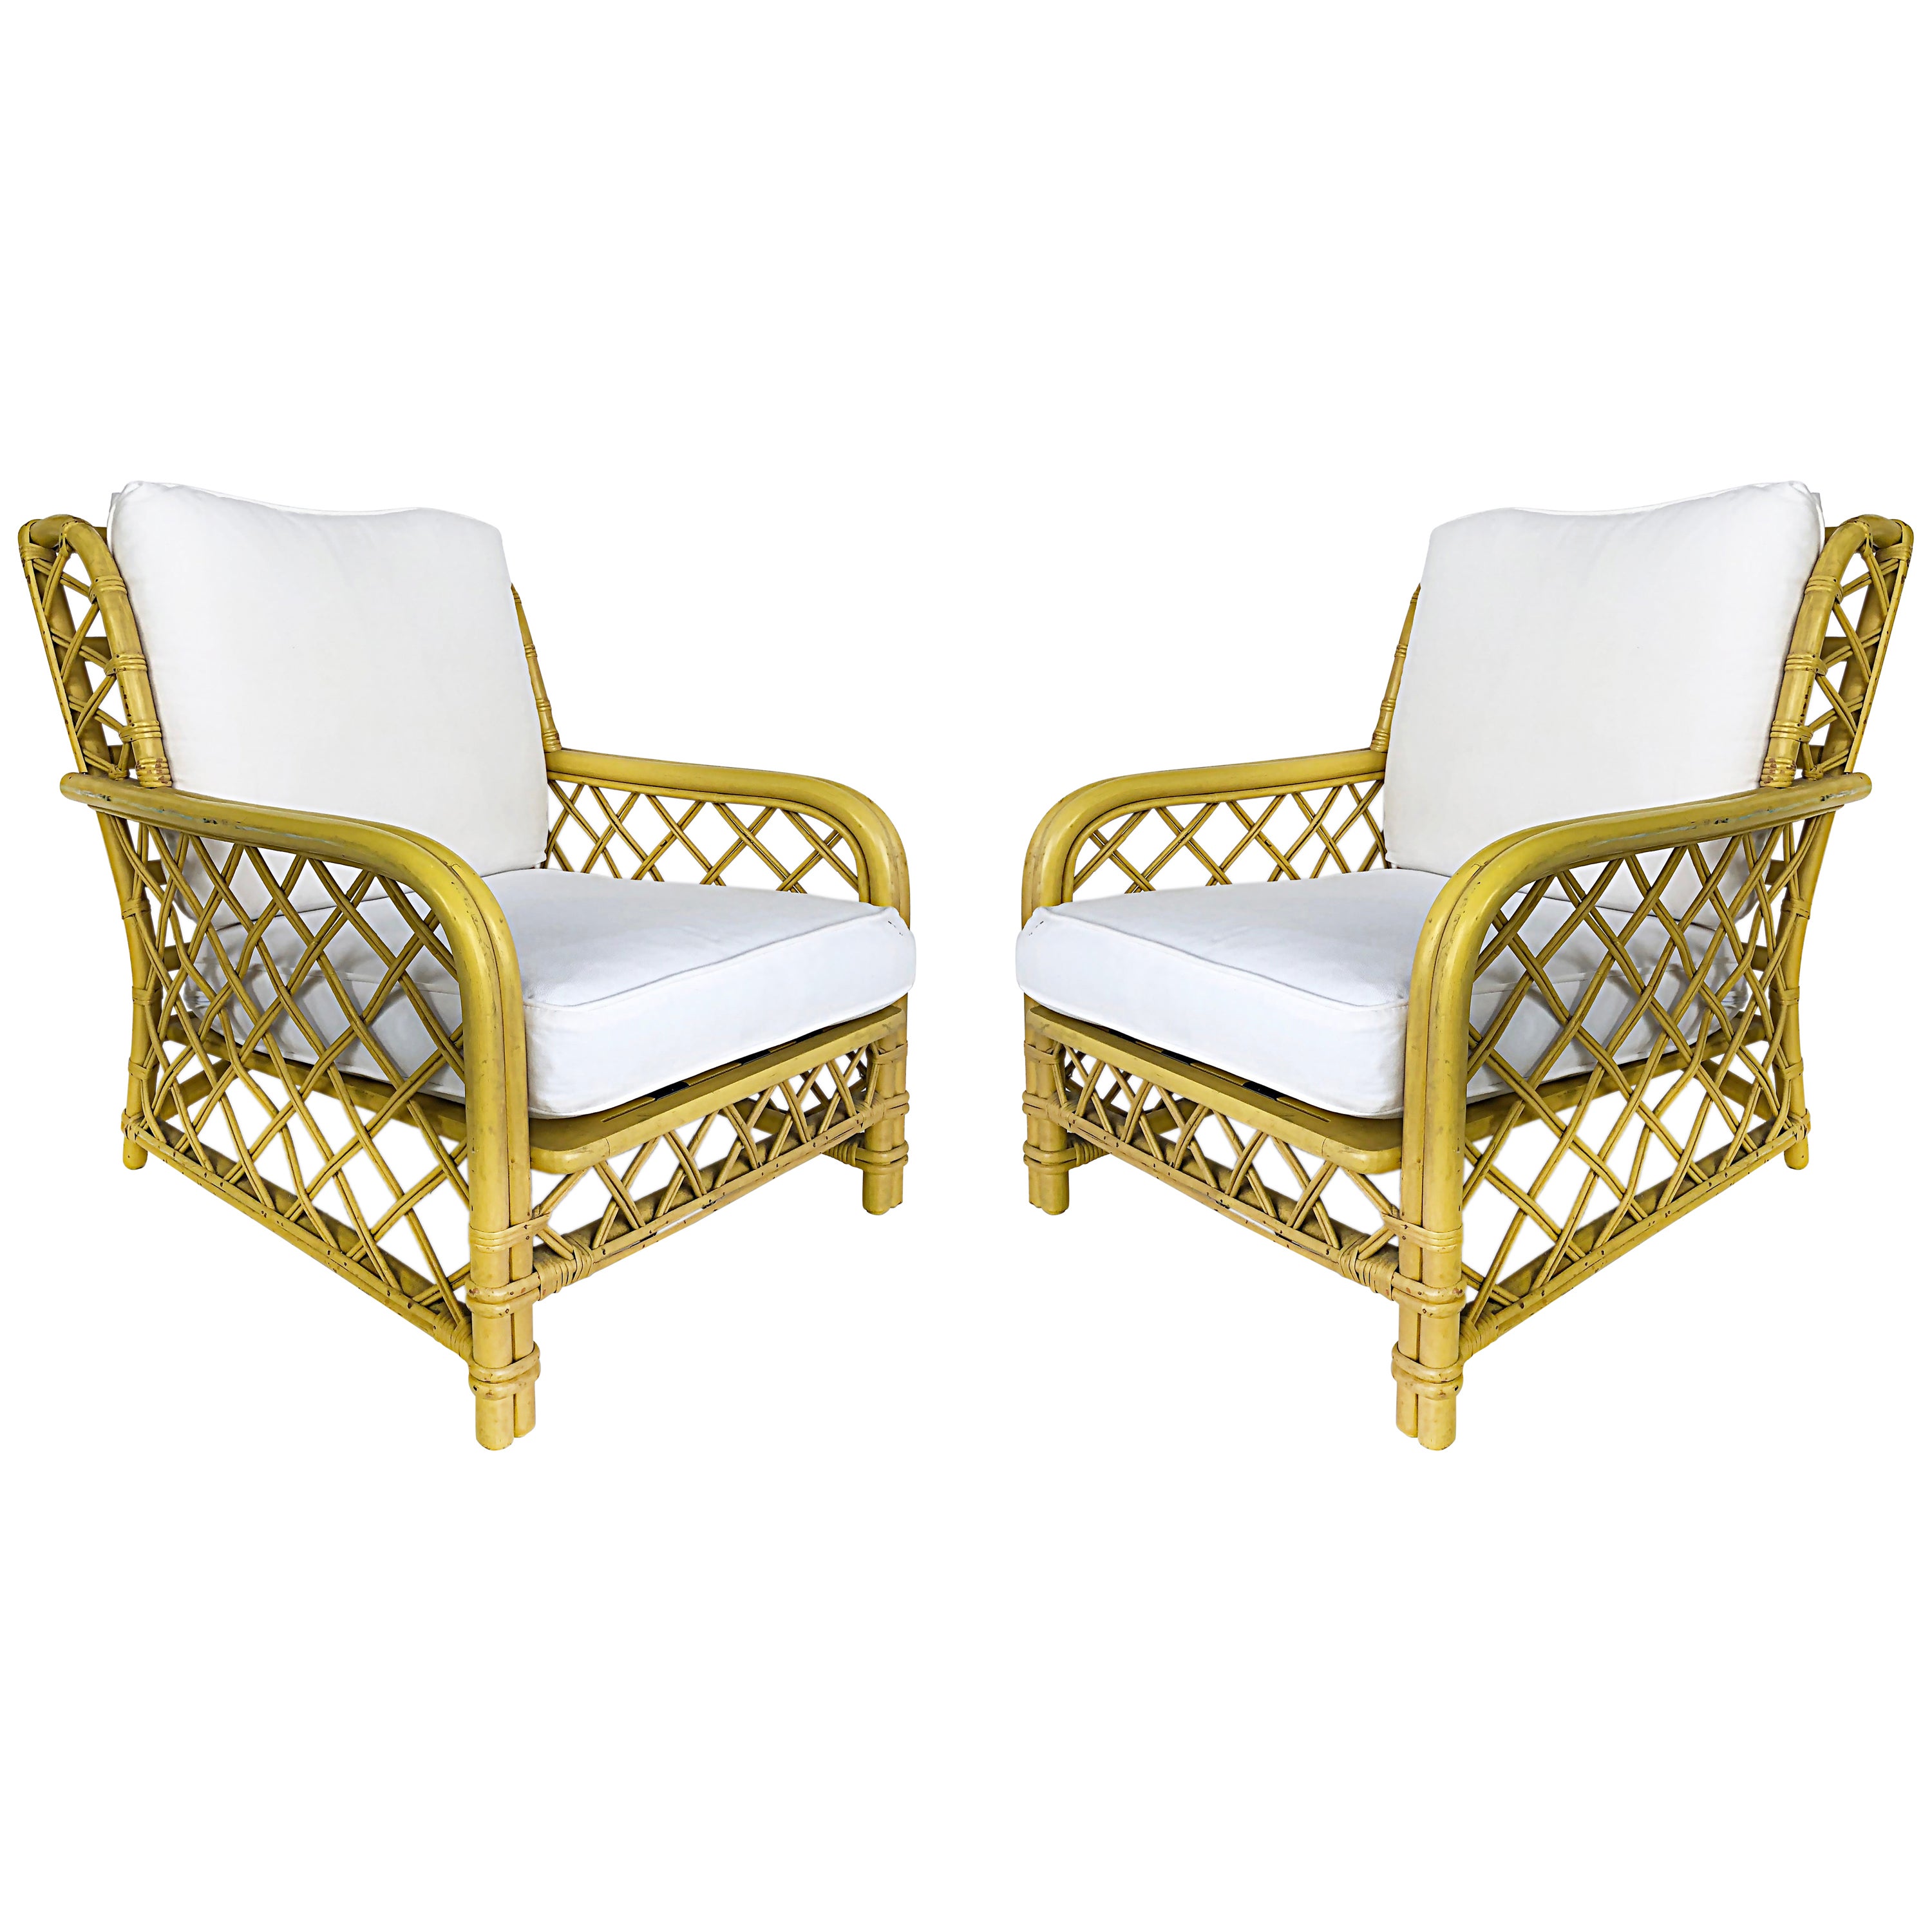 Ficks Reed Bent / Woven Rattan Upholstered Lounge Chairs, Pair